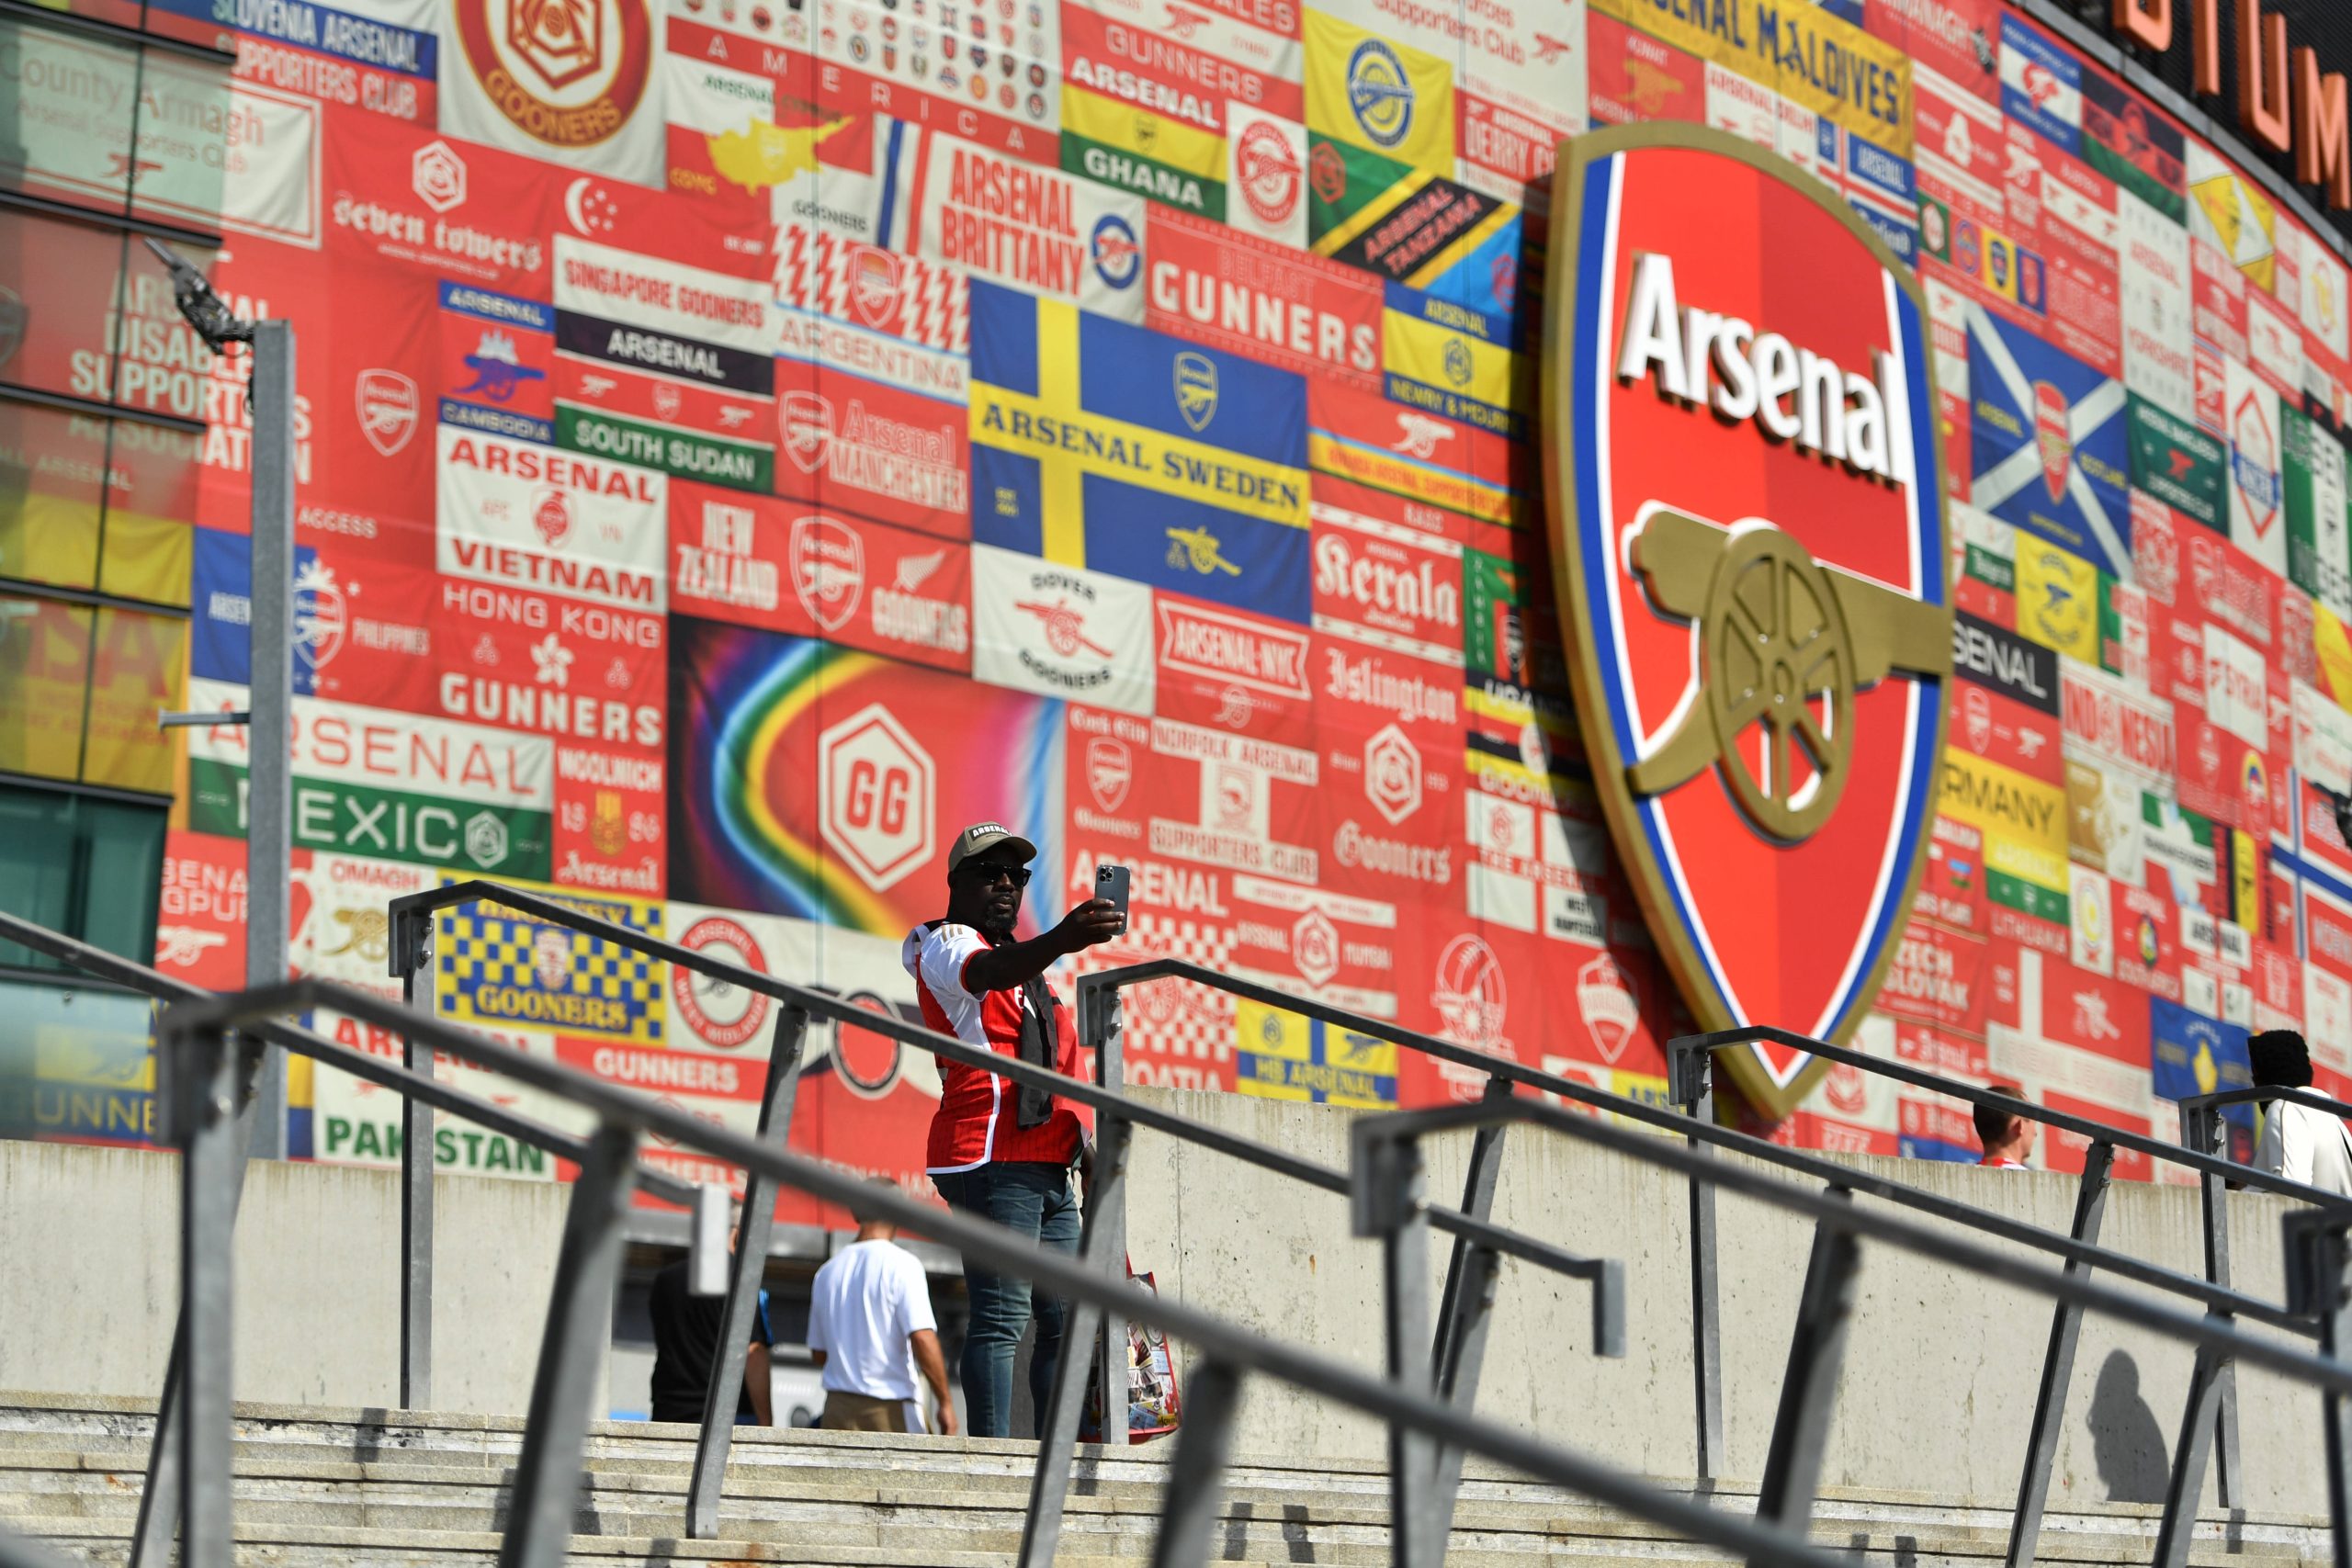 Fan taking photo outside of the Emirates stadium - Arsenal Predicted Lineup